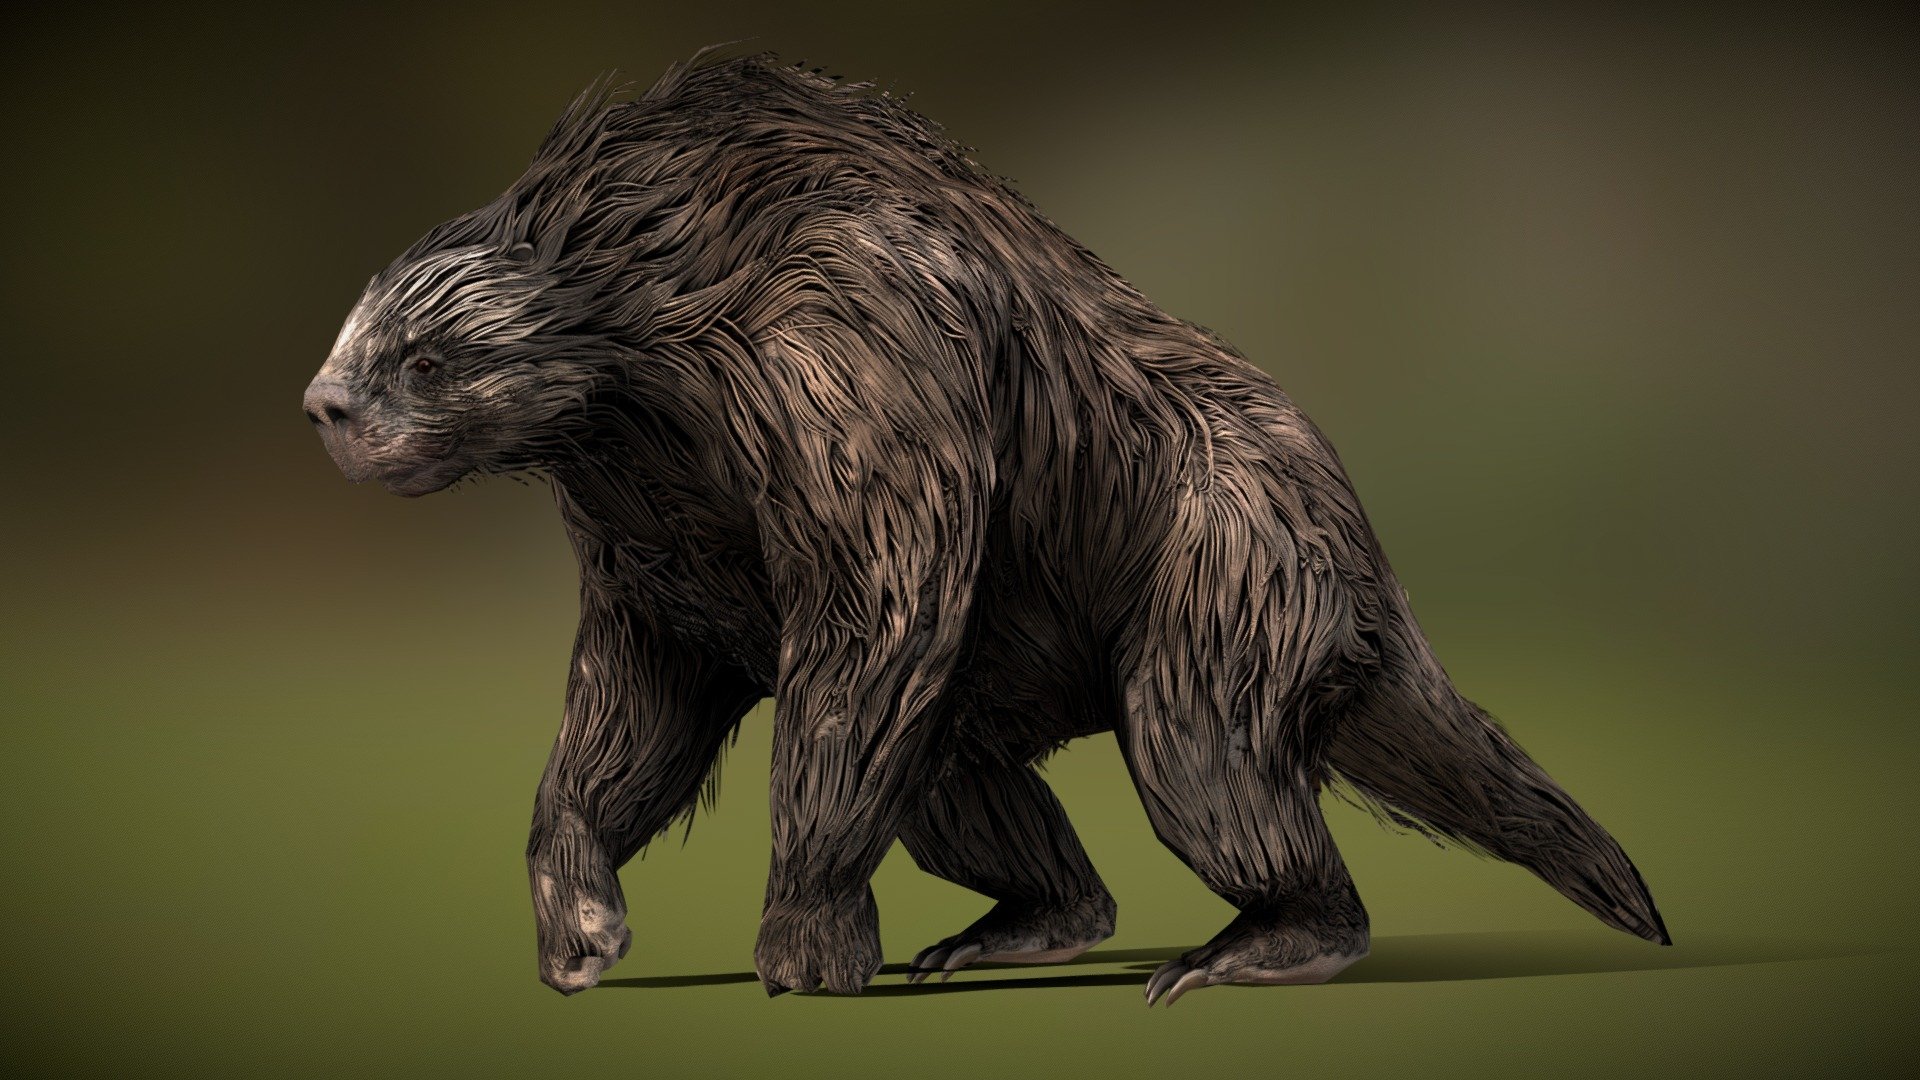 Megalonyx was made for the mobile game Wild Hunt for Ten Square Games. Sculpture, retopology and uv-mapping made in Blender, textures in Substance Painter and Photoshop 
Animations created by Guilherme Gazzoni. Instagram: @gzzoni.3d - Megalonyx - 3D model by 3dbogi 3d model